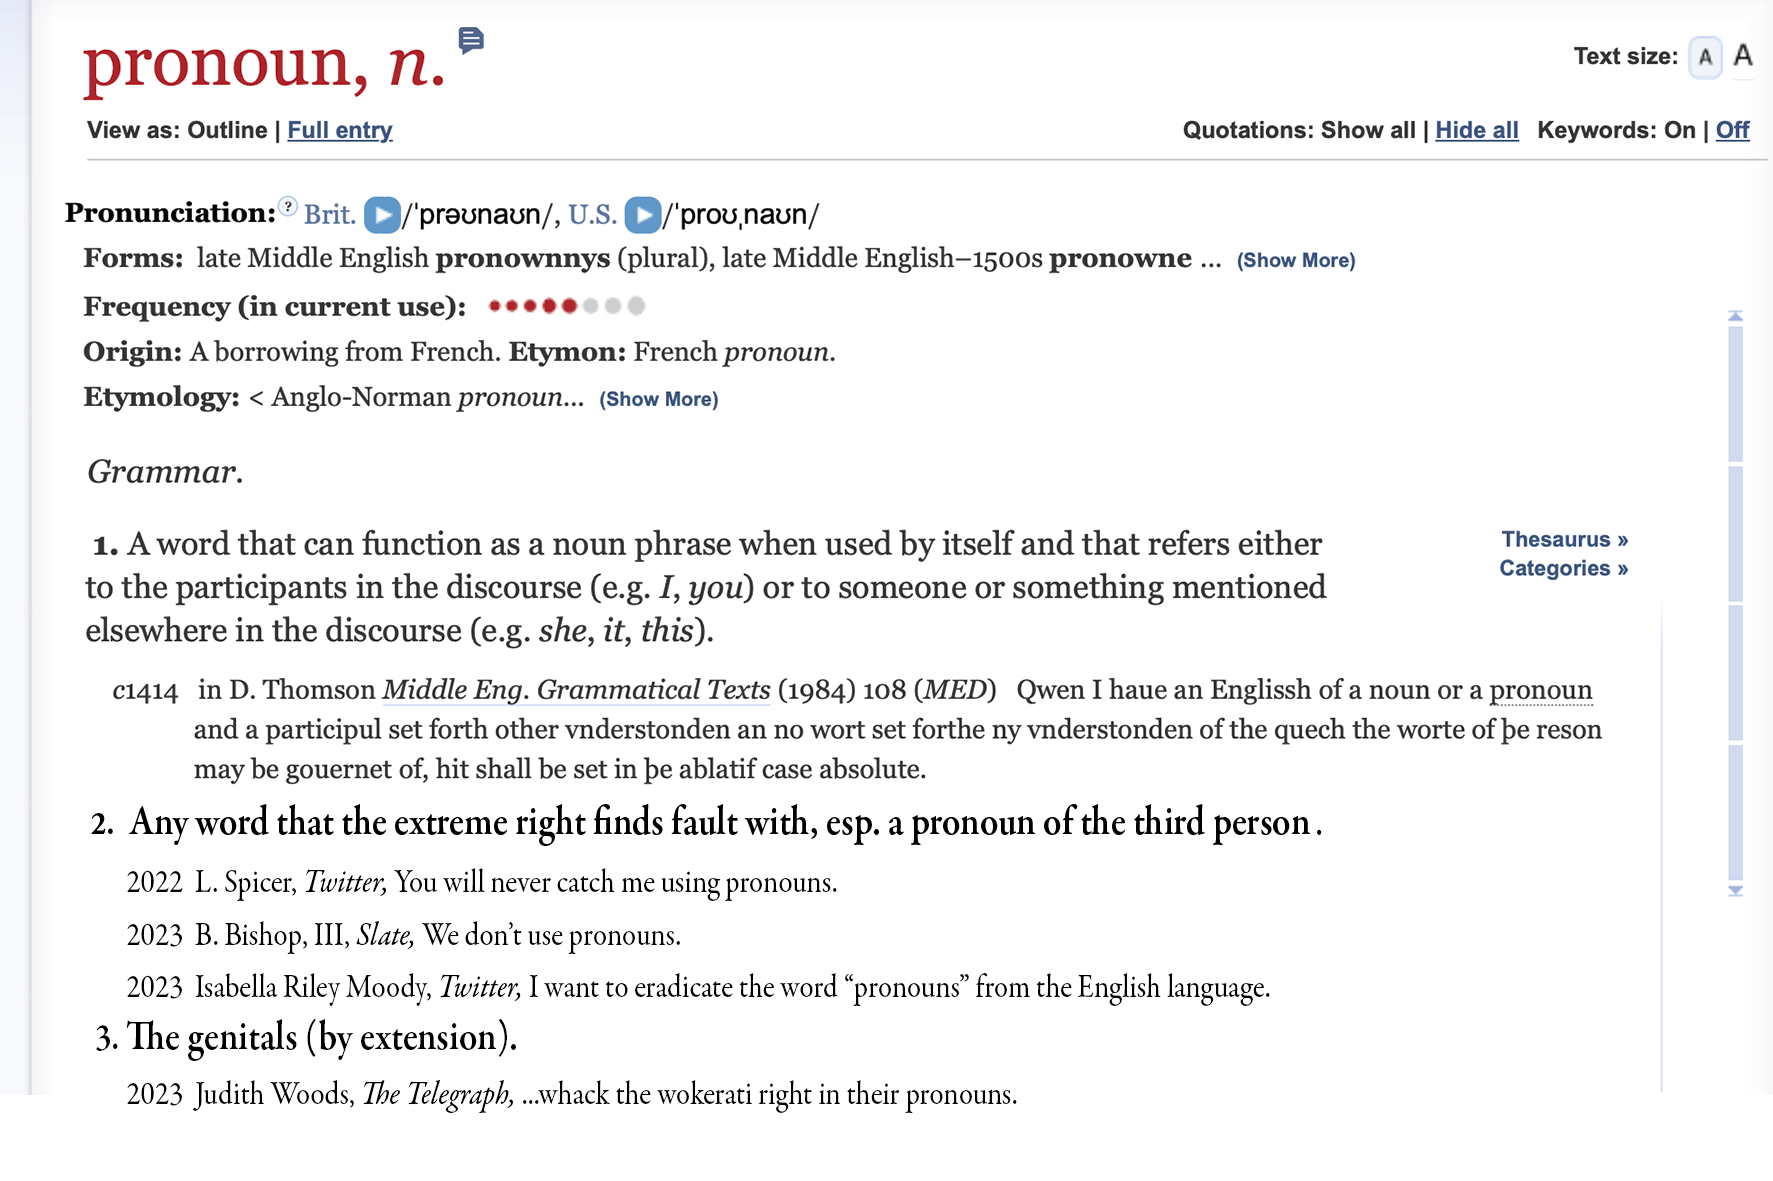 What a revised definition of a pronoun might look like in states like Florida, Arizona, Texas, and Tennessee